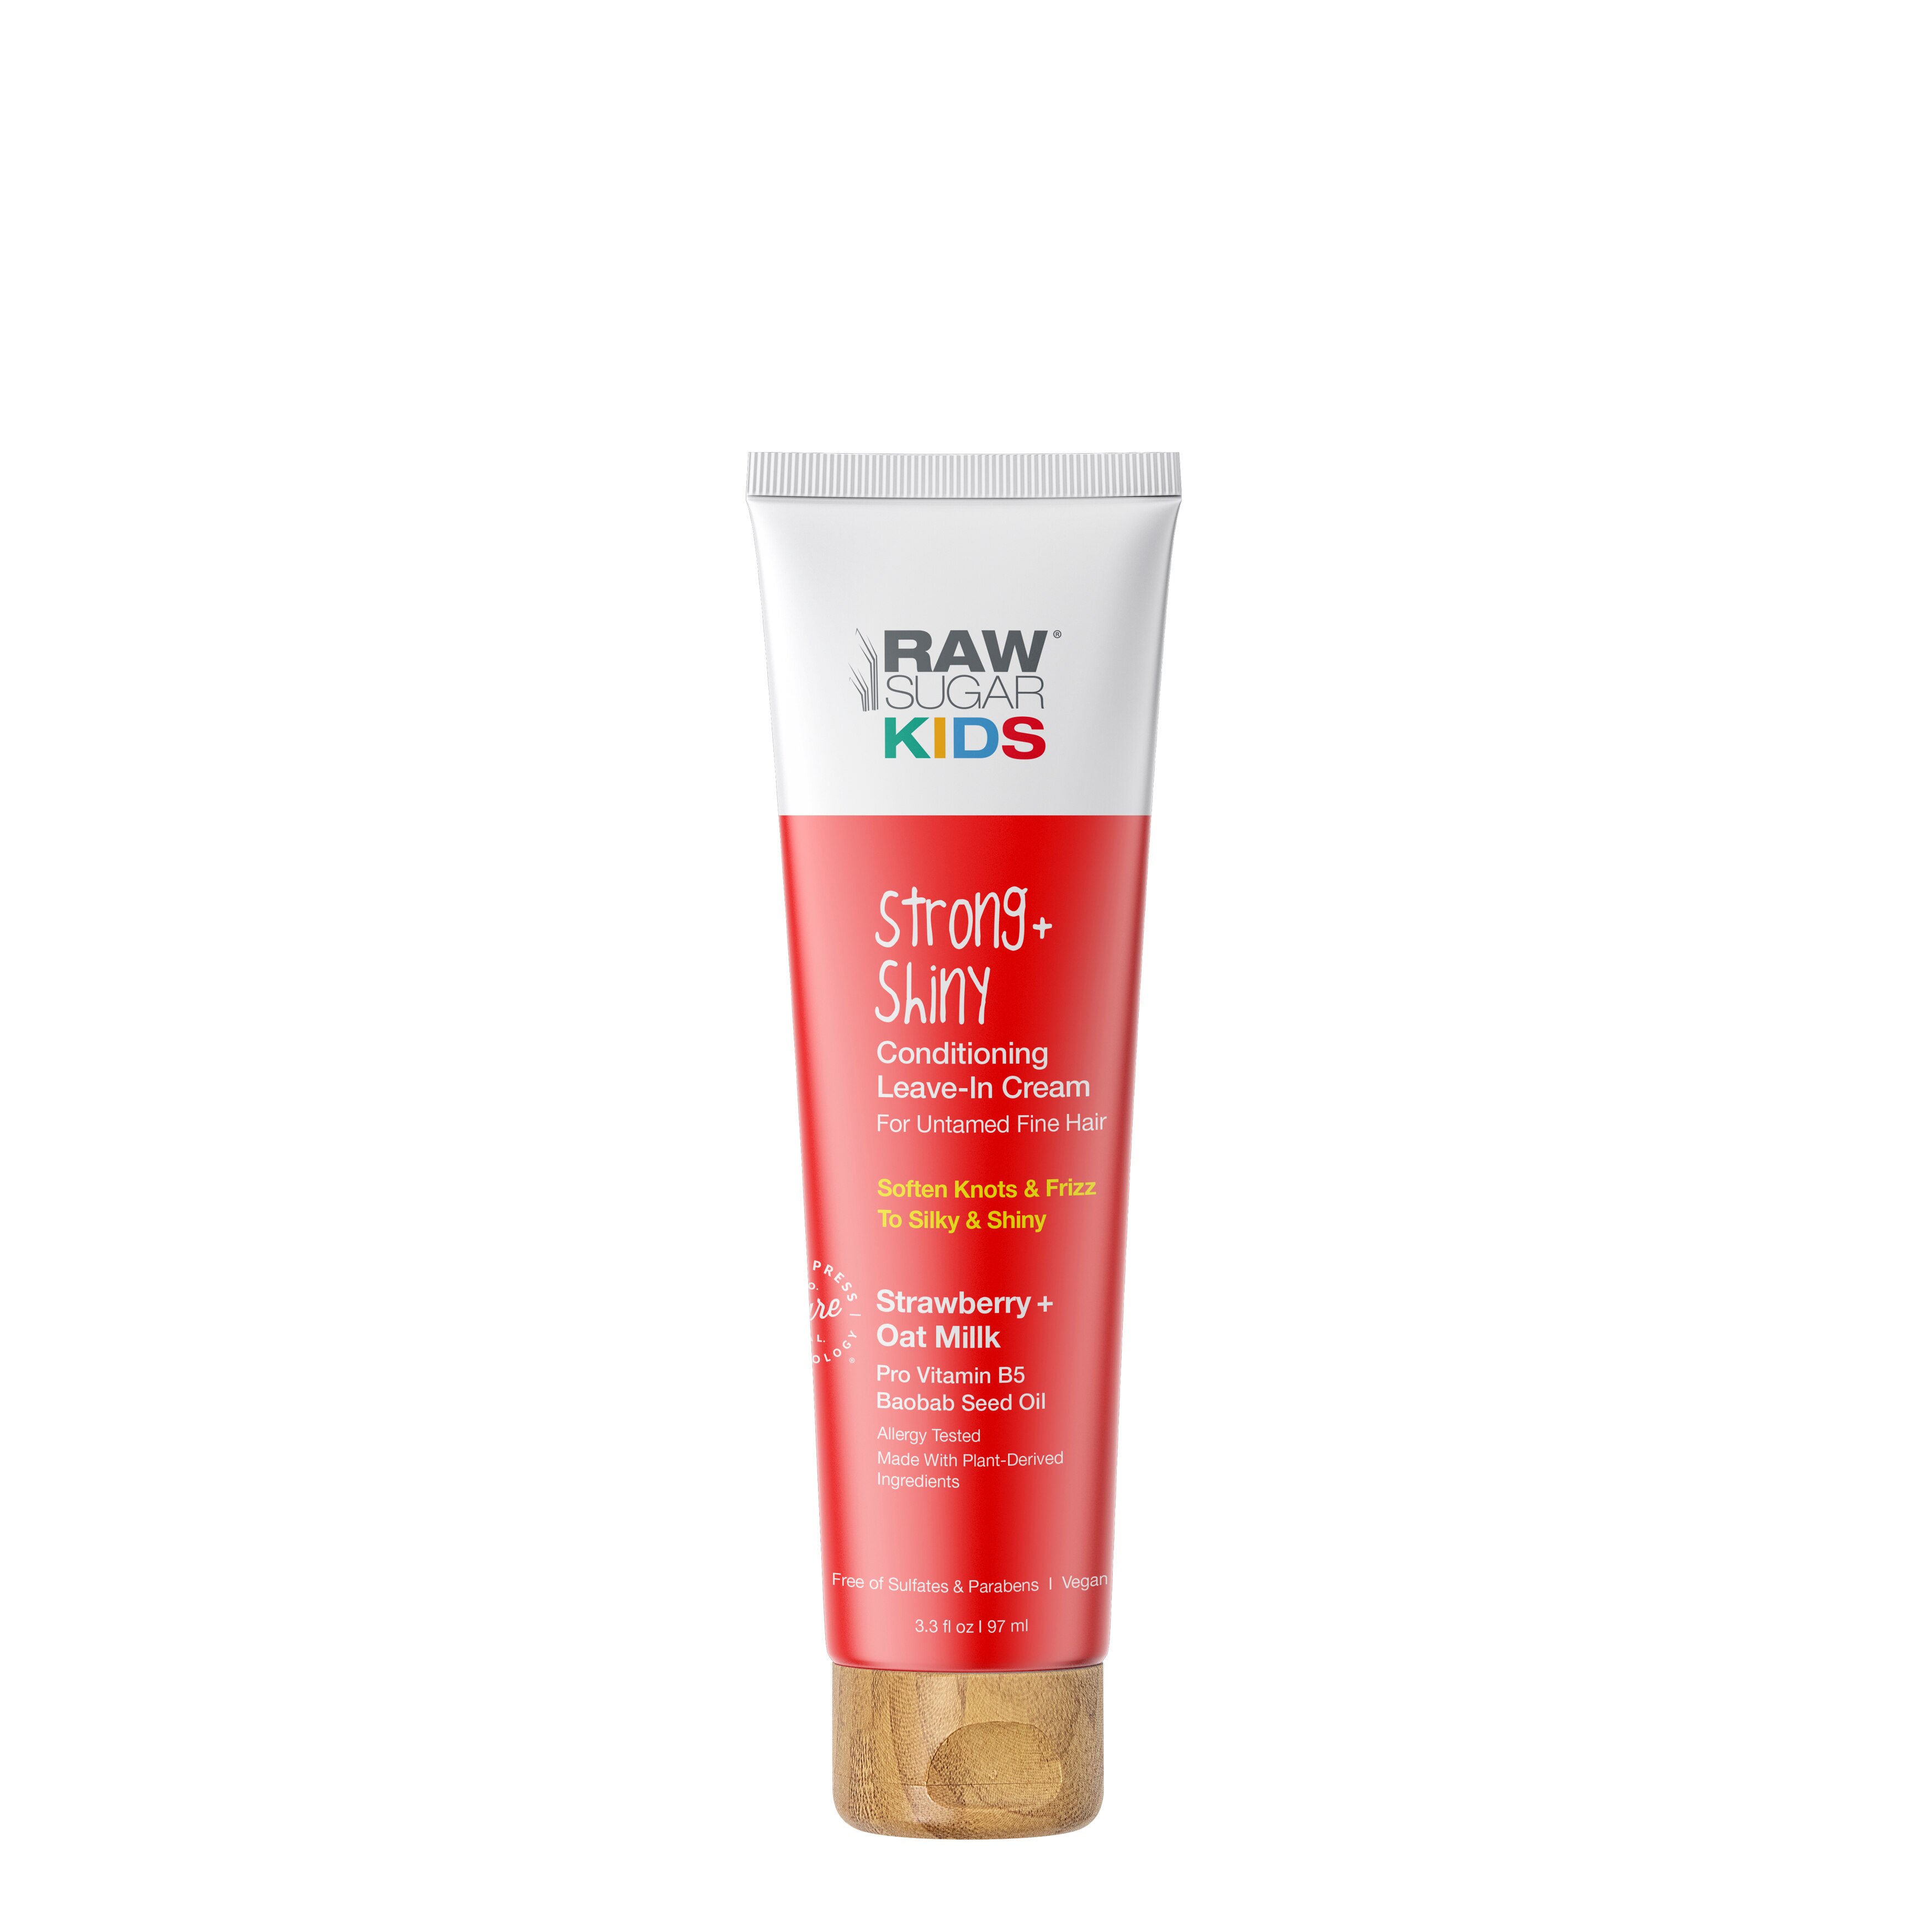 Raw Sugar Kid's Strong + Shiny Leave In Conditioning Cream